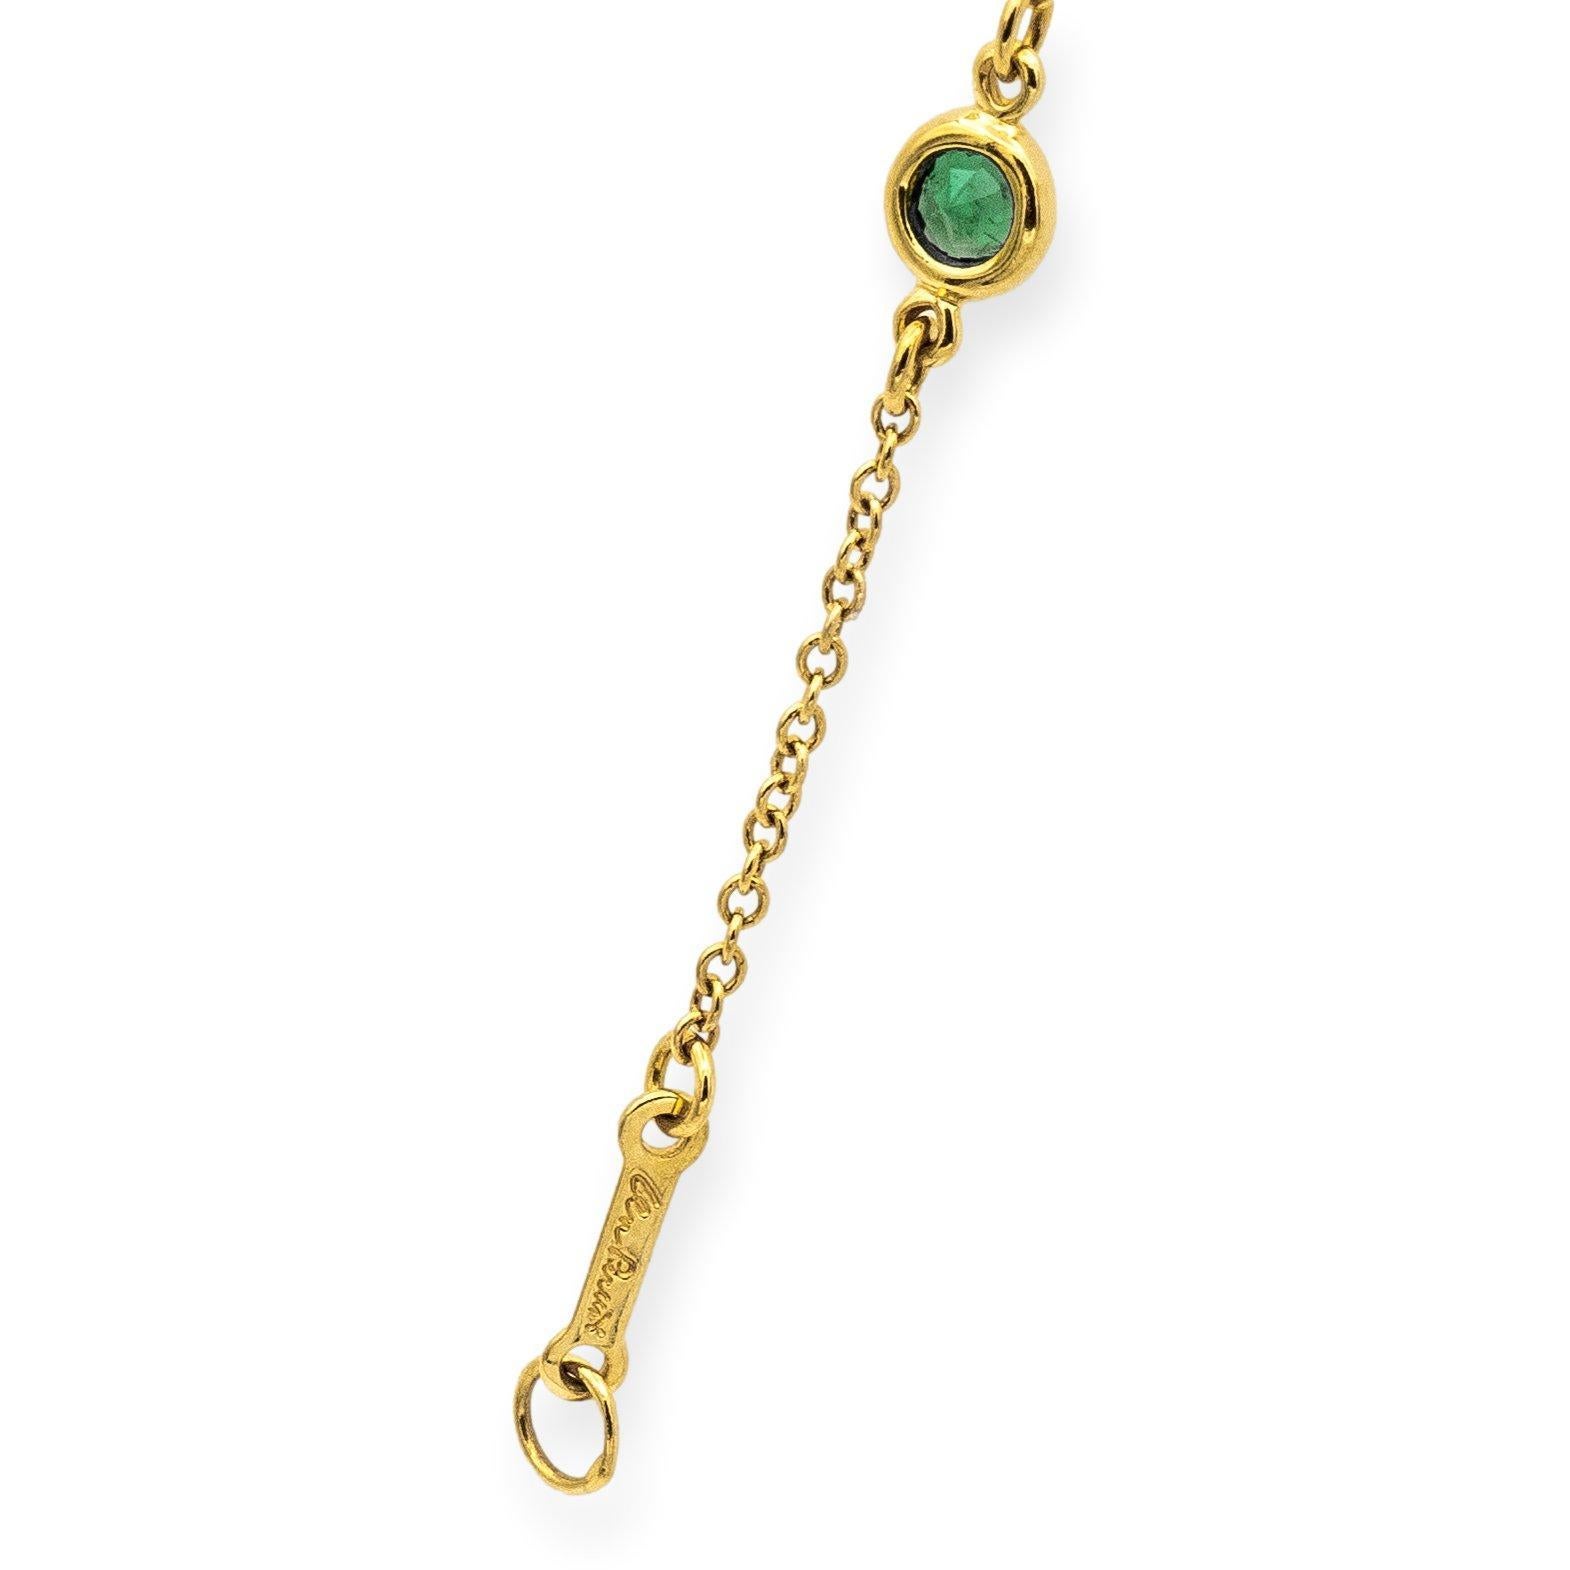 Tiffany & Co. Bezel Bracelet from the Color by the Yard collection, designed by Elsa Peretti. Crafted in 18K yellow gold, the bracelet features five exquisite round deep green emeralds, each set in delicate bezels, totaling 0.40 carats. Measuring 7